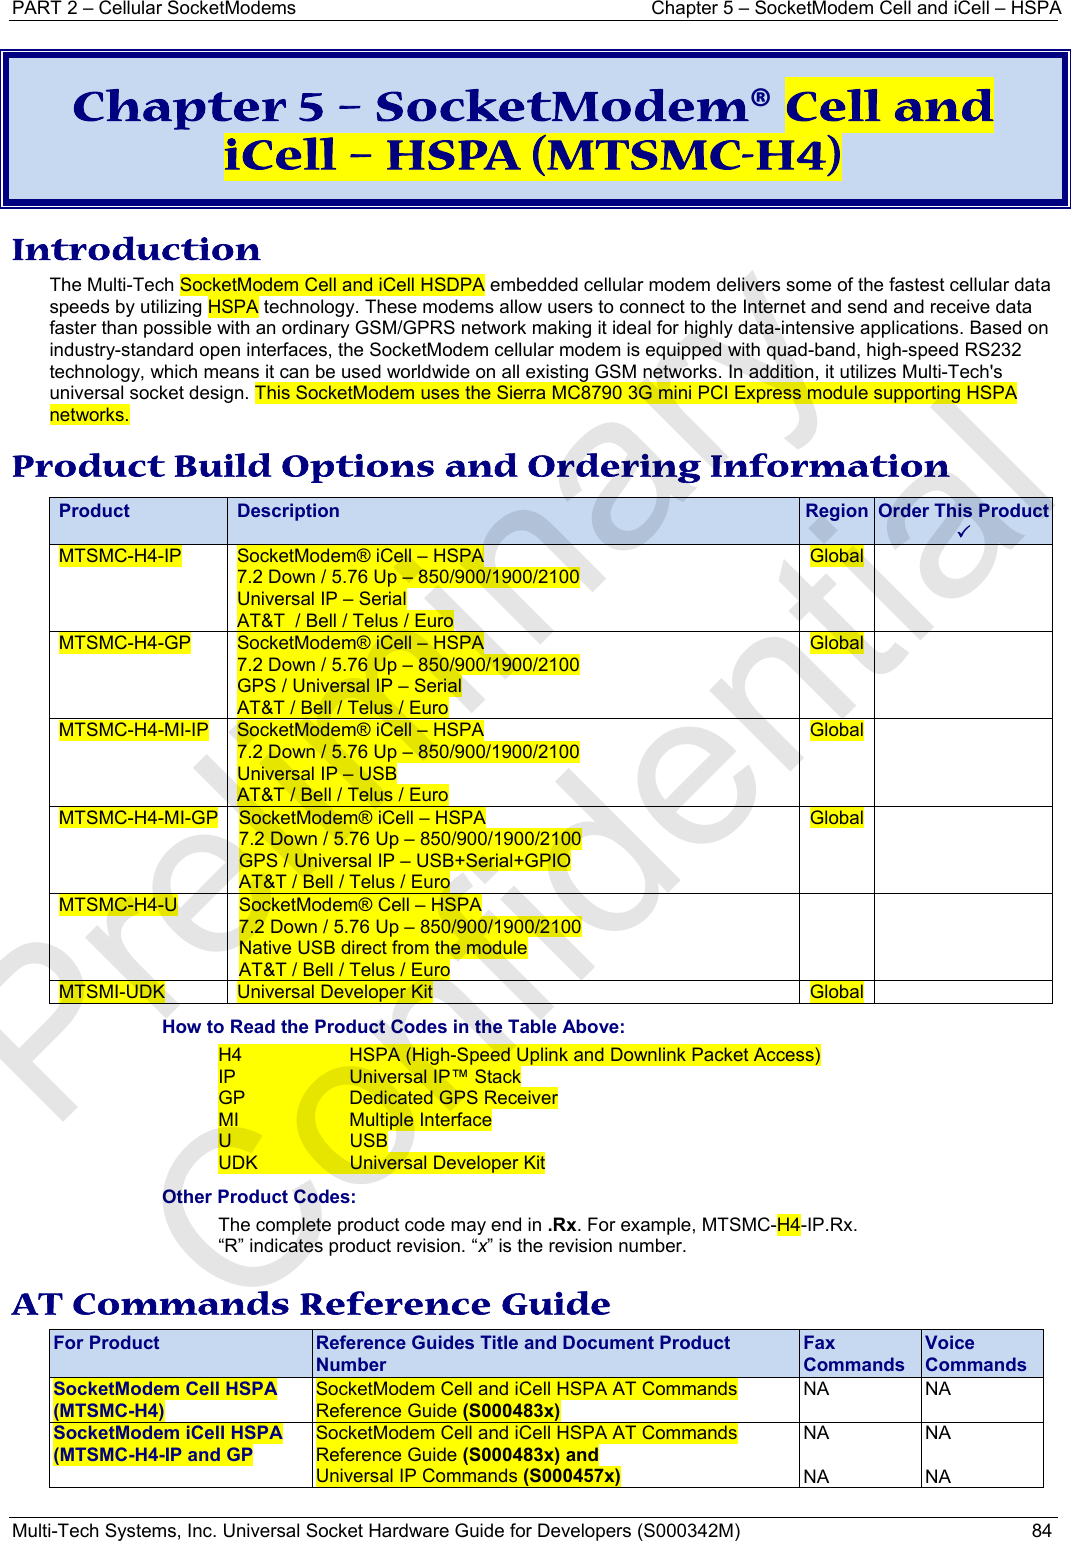 PART 2 – Cellular SocketModems  Chapter 5 – SocketModem Cell and iCell – HSPA Multi-Tech Systems, Inc. Universal Socket Hardware Guide for Developers (S000342M)  84  Chapter 5 – SocketModem® Cell and iCell – HSPA (MTSMC-H4) Introduction The Multi-Tech SocketModem Cell and iCell HSDPA embedded cellular modem delivers some of the fastest cellular data speeds by utilizing HSPA technology. These modems allow users to connect to the Internet and send and receive data faster than possible with an ordinary GSM/GPRS network making it ideal for highly data-intensive applications. Based on industry-standard open interfaces, the SocketModem cellular modem is equipped with quad-band, high-speed RS232 technology, which means it can be used worldwide on all existing GSM networks. In addition, it utilizes Multi-Tech&apos;s universal socket design. This SocketModem uses the Sierra MC8790 3G mini PCI Express module supporting HSPA networks. Product Build Options and Ordering Information Product Description Region Order This Product3MTSMC-H4-IP  SocketModem® iCell – HSPA  7.2 Down / 5.76 Up – 850/900/1900/2100 Universal IP – Serial AT&amp;T  / Bell / Telus / Euro Global  MTSMC-H4-GP  SocketModem® iCell – HSPA  7.2 Down / 5.76 Up – 850/900/1900/2100 GPS / Universal IP – Serial AT&amp;T / Bell / Telus / Euro Global  MTSMC-H4-MI-IP  SocketModem® iCell – HSPA  7.2 Down / 5.76 Up – 850/900/1900/2100 Universal IP – USB  AT&amp;T / Bell / Telus / Euro Global  MTSMC-H4-MI-GP  SocketModem® iCell – HSPA  7.2 Down / 5.76 Up – 850/900/1900/2100 GPS / Universal IP – USB+Serial+GPIO AT&amp;T / Bell / Telus / Euro Global  MTSMC-H4-U  SocketModem® Cell – HSPA 7.2 Down / 5.76 Up – 850/900/1900/2100 Native USB direct from the module AT&amp;T / Bell / Telus / Euro   MTSMI-UDK  Universal Developer Kit  Global  How to Read the Product Codes in the Table Above: H4  HSPA (High-Speed Uplink and Downlink Packet Access) IP  Universal IP™ Stack GP  Dedicated GPS Receiver MI Multiple Interface U USB UDK  Universal Developer Kit Other Product Codes: The complete product code may end in .Rx. For example, MTSMC-H4-IP.Rx.   “R” indicates product revision. “x” is the revision number. AT Commands Reference Guide For Product  Reference Guides Title and Document Product Number Fax Commands Voice Commands SocketModem Cell HSPA (MTSMC-H4) SocketModem Cell and iCell HSPA AT Commands Reference Guide (S000483x) NA NA SocketModem iCell HSPA (MTSMC-H4-IP and GP SocketModem Cell and iCell HSPA AT Commands Reference Guide (S000483x) and Universal IP Commands (S000457x) NA  NA NA  NA   Preliminary  Confidential